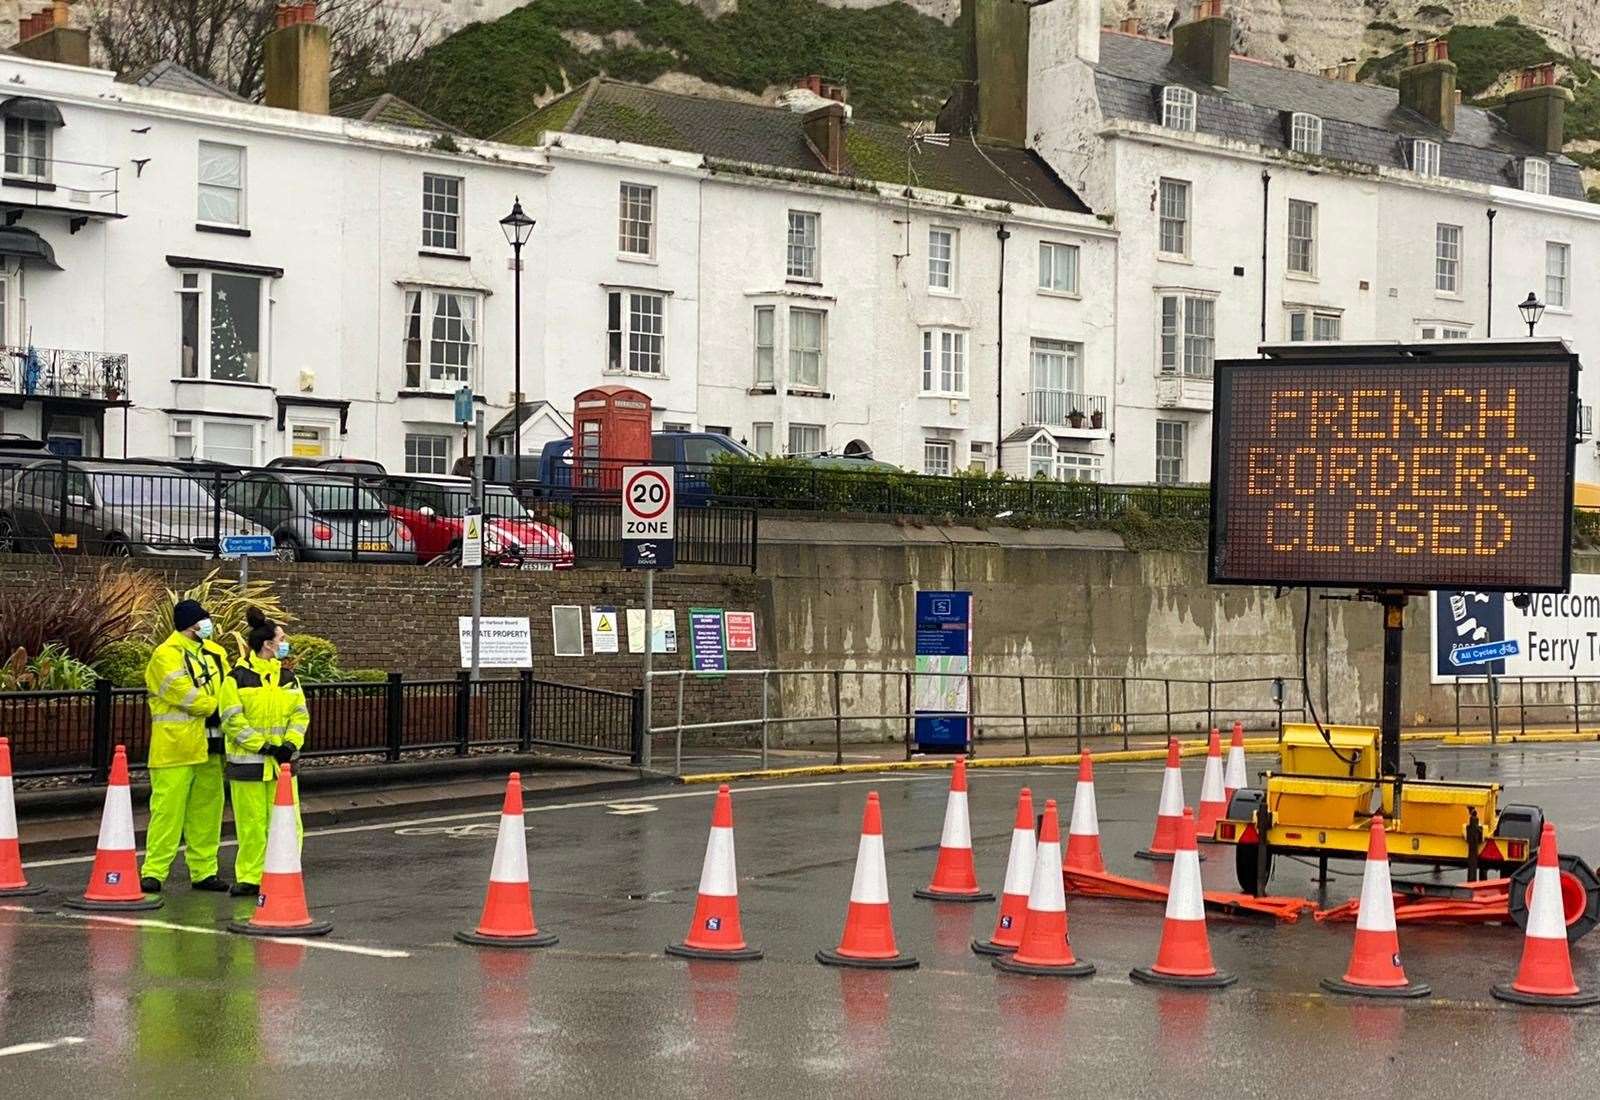 The entrance to the Port of Dover Picture: Barry Goodwin